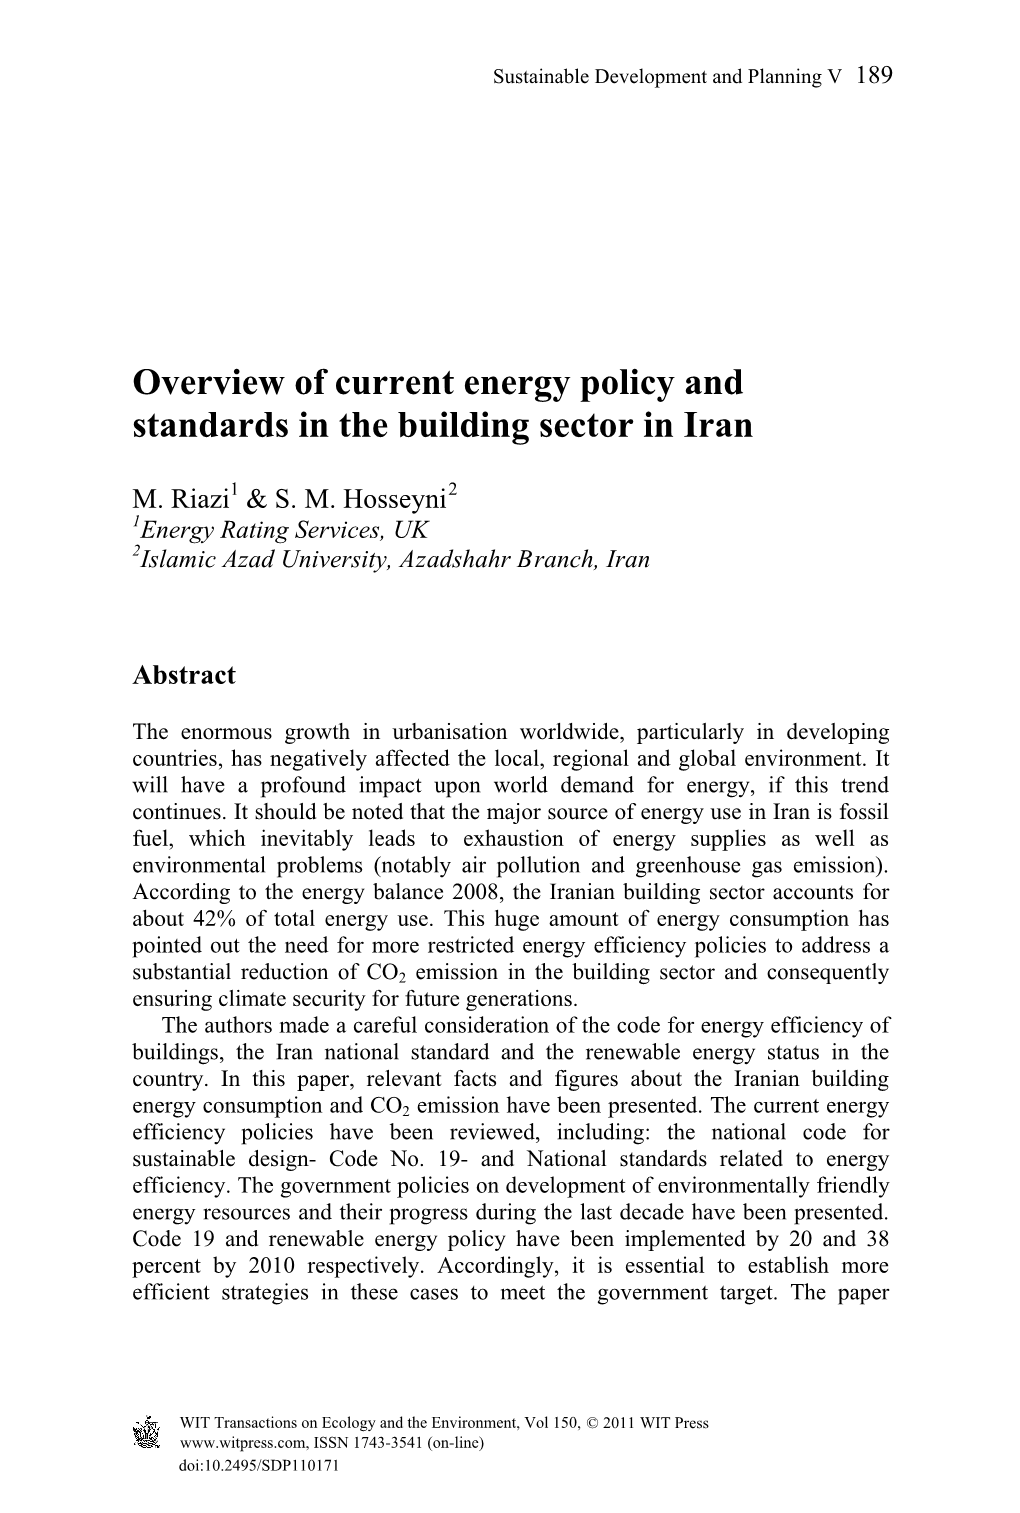 Overview of Current Energy Policy and Standards in the Building Sector in Iran